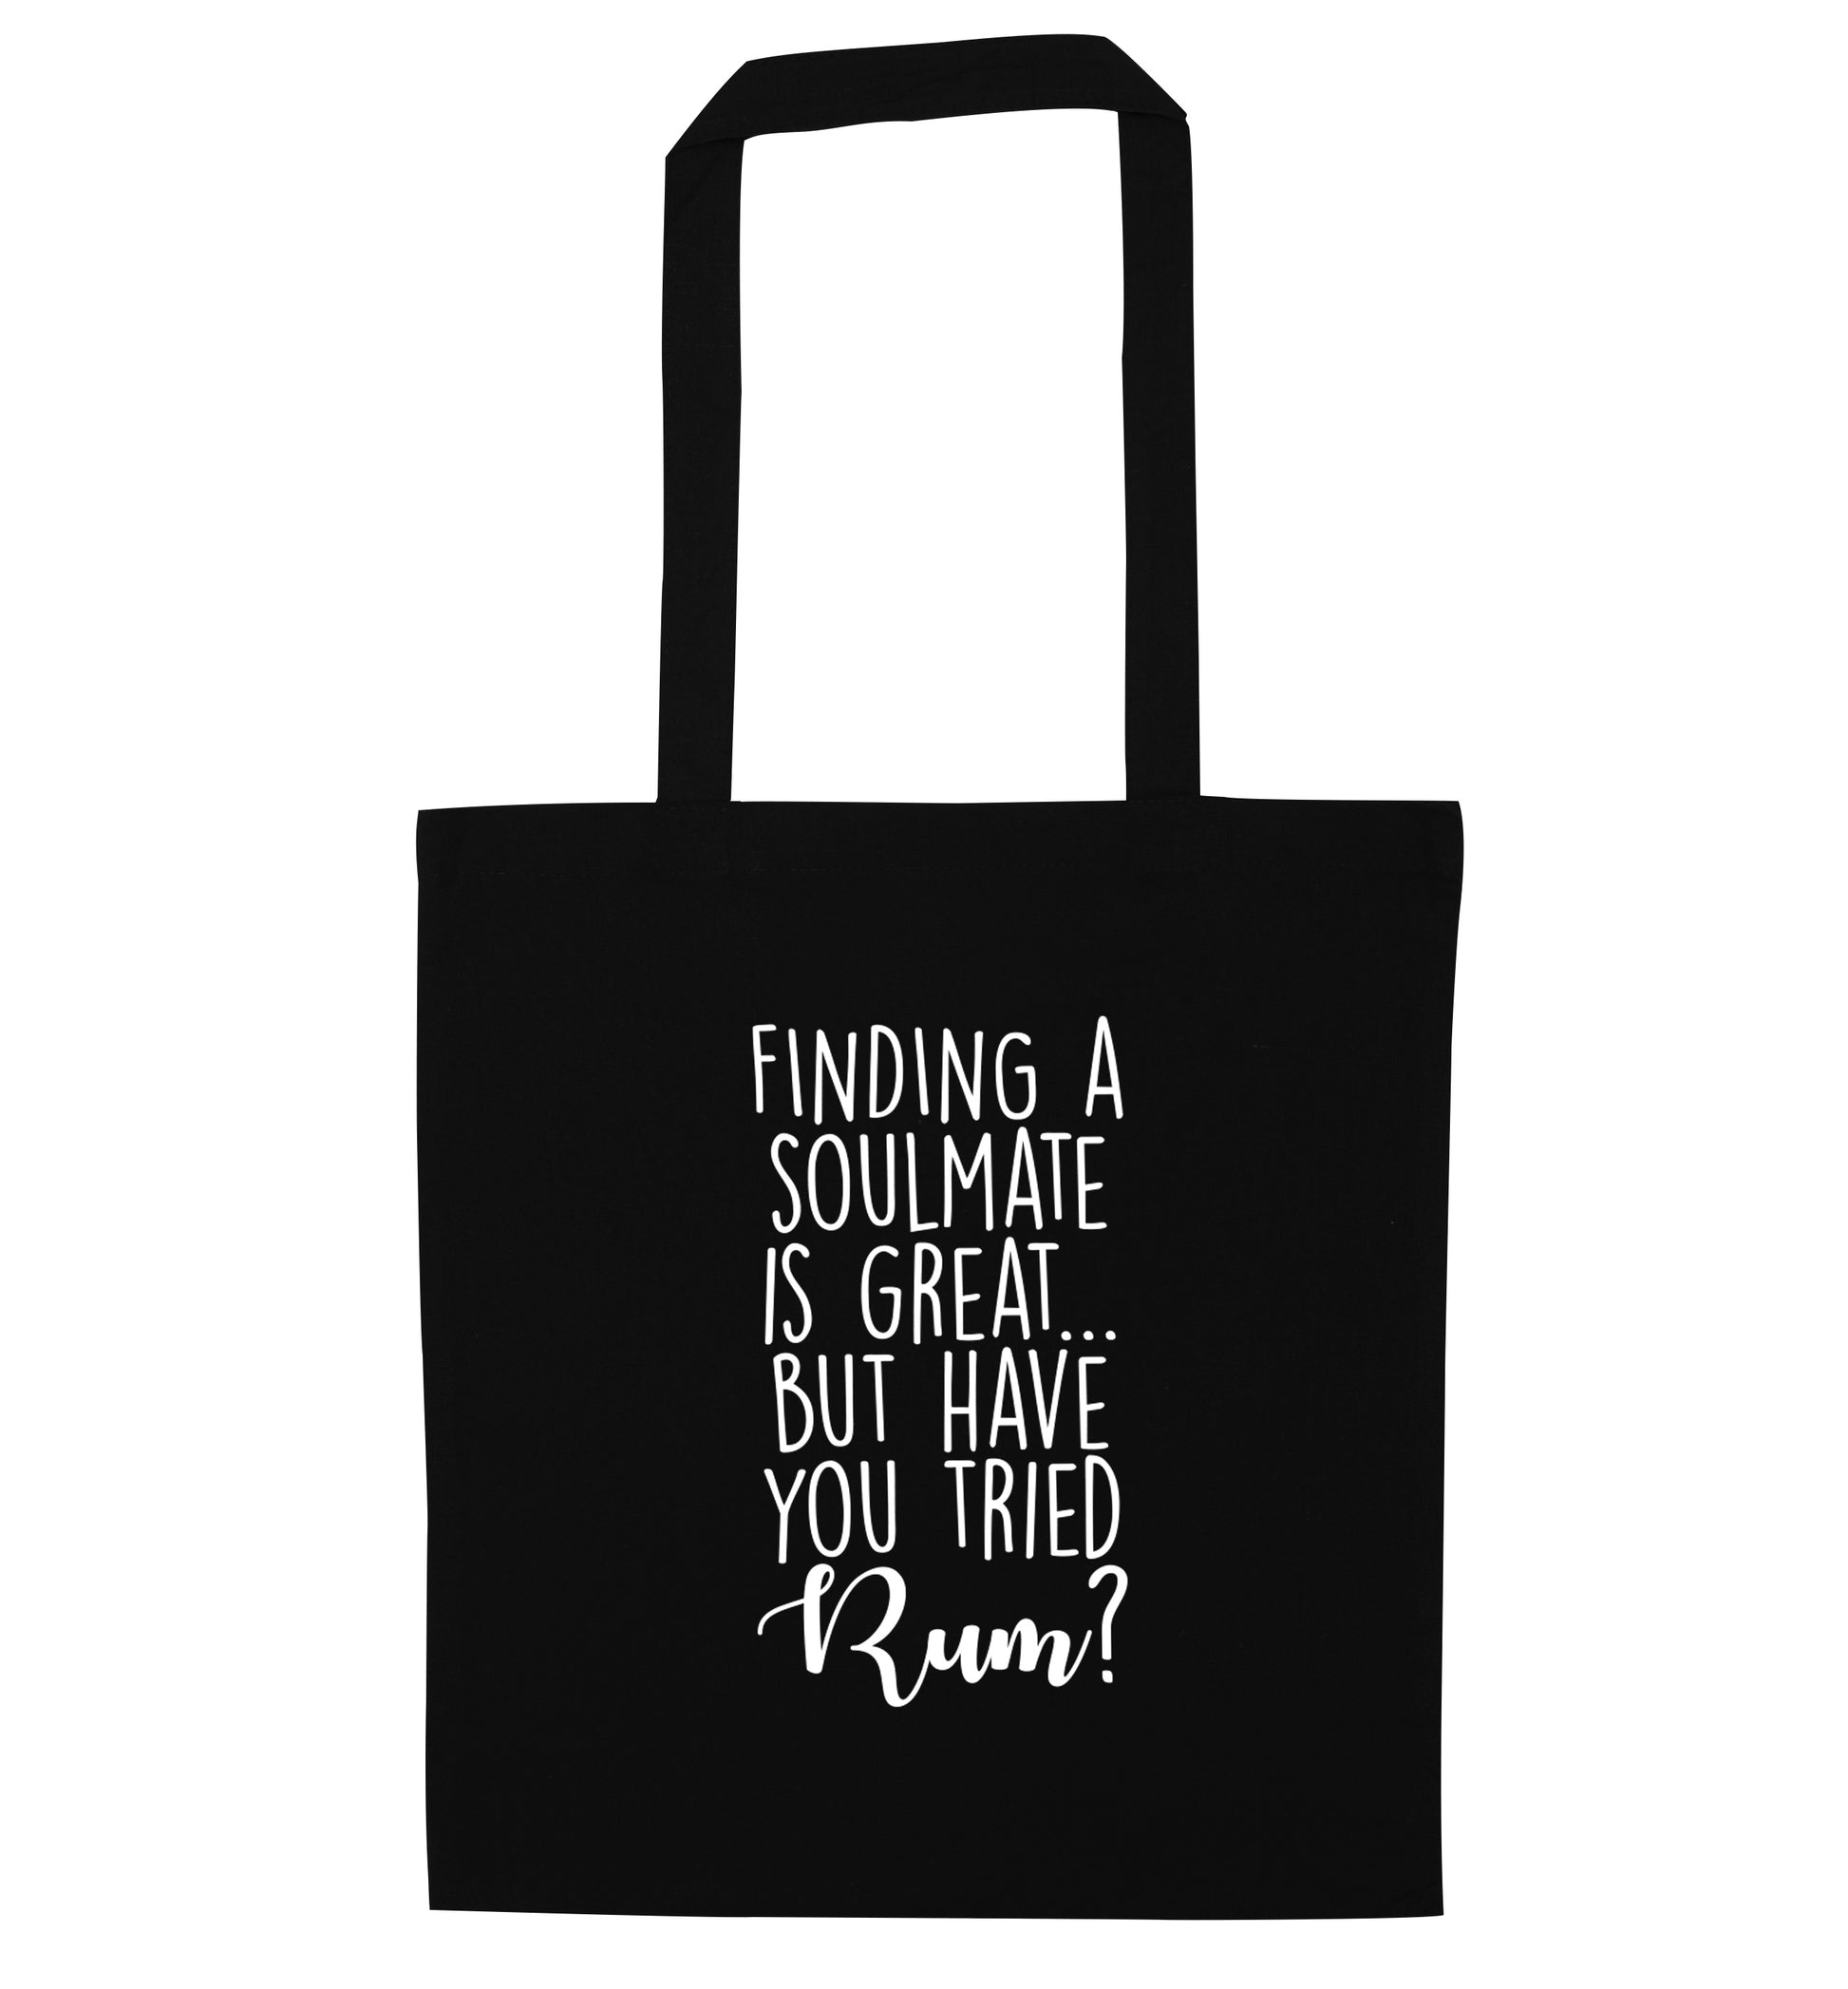 Finding a soulmate is great but have you tried rum? black tote bag